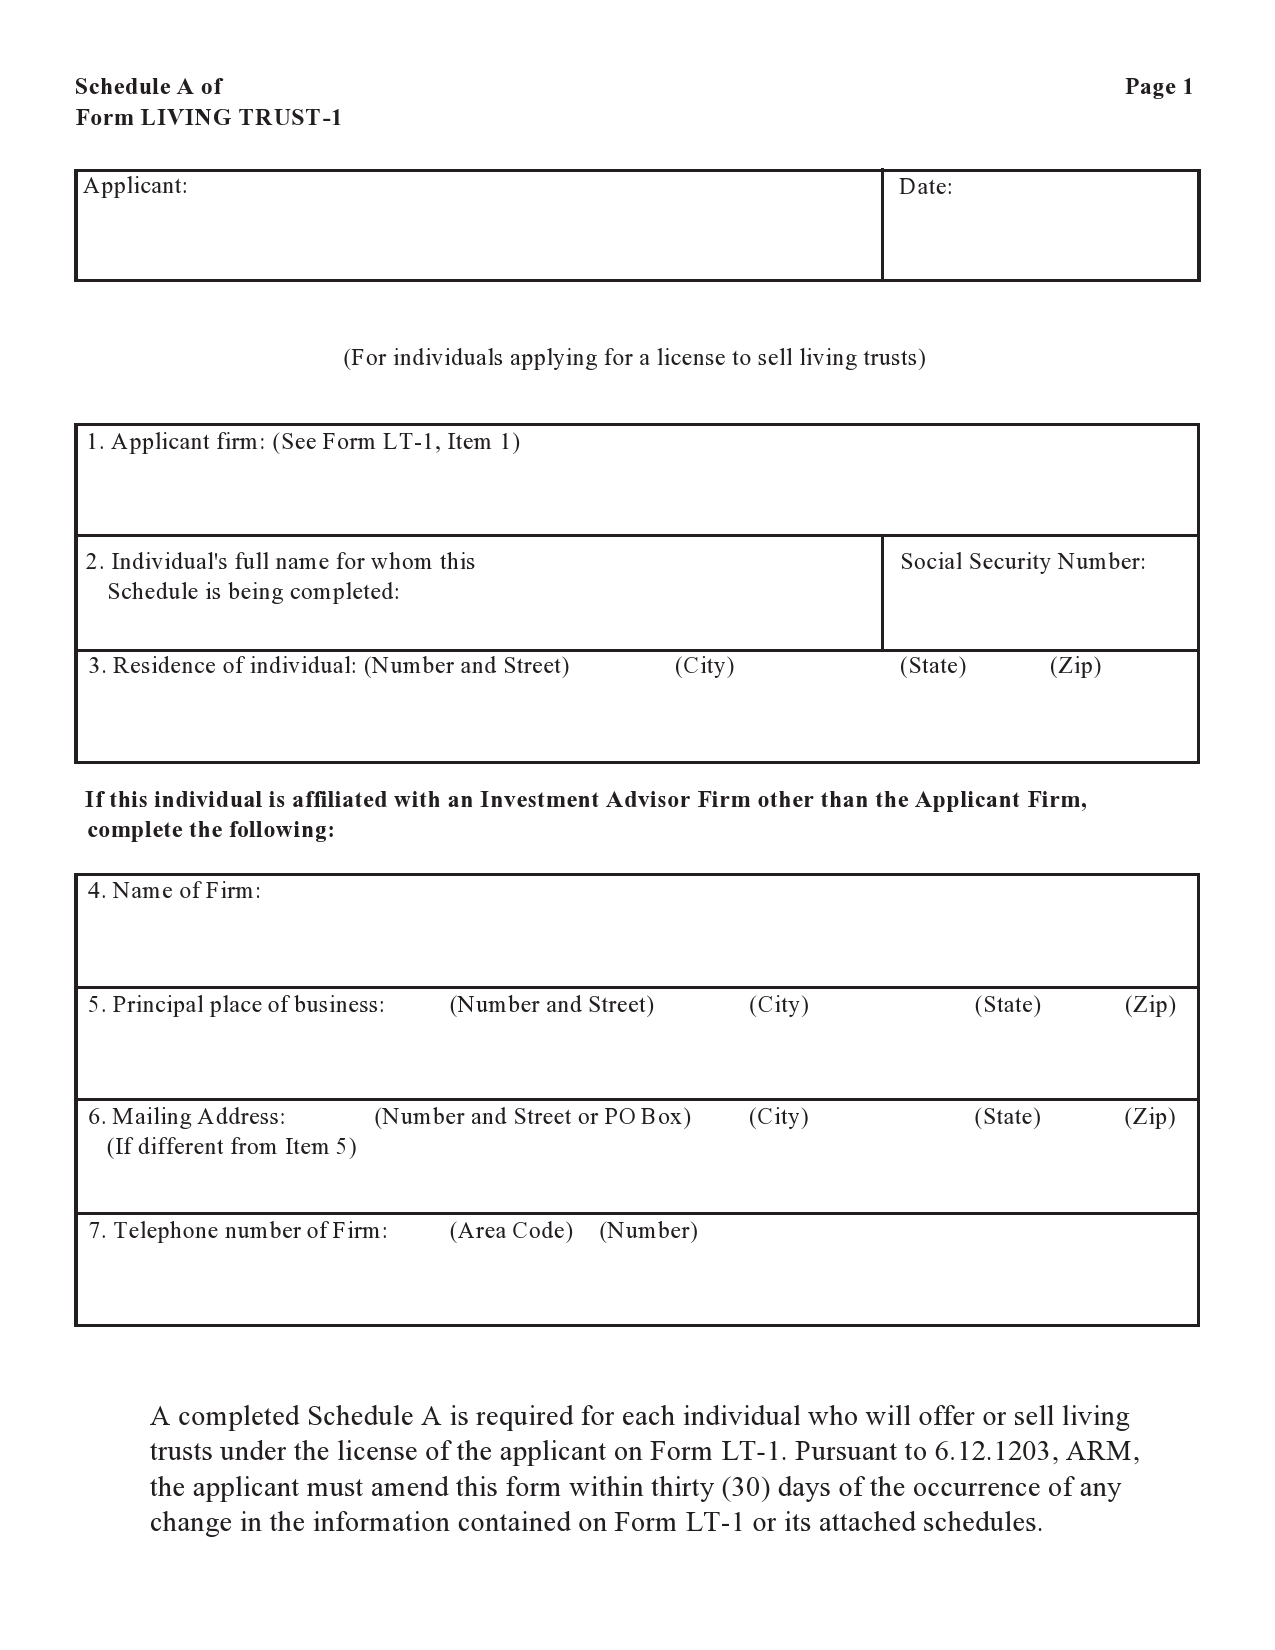 Free living trust forms 10